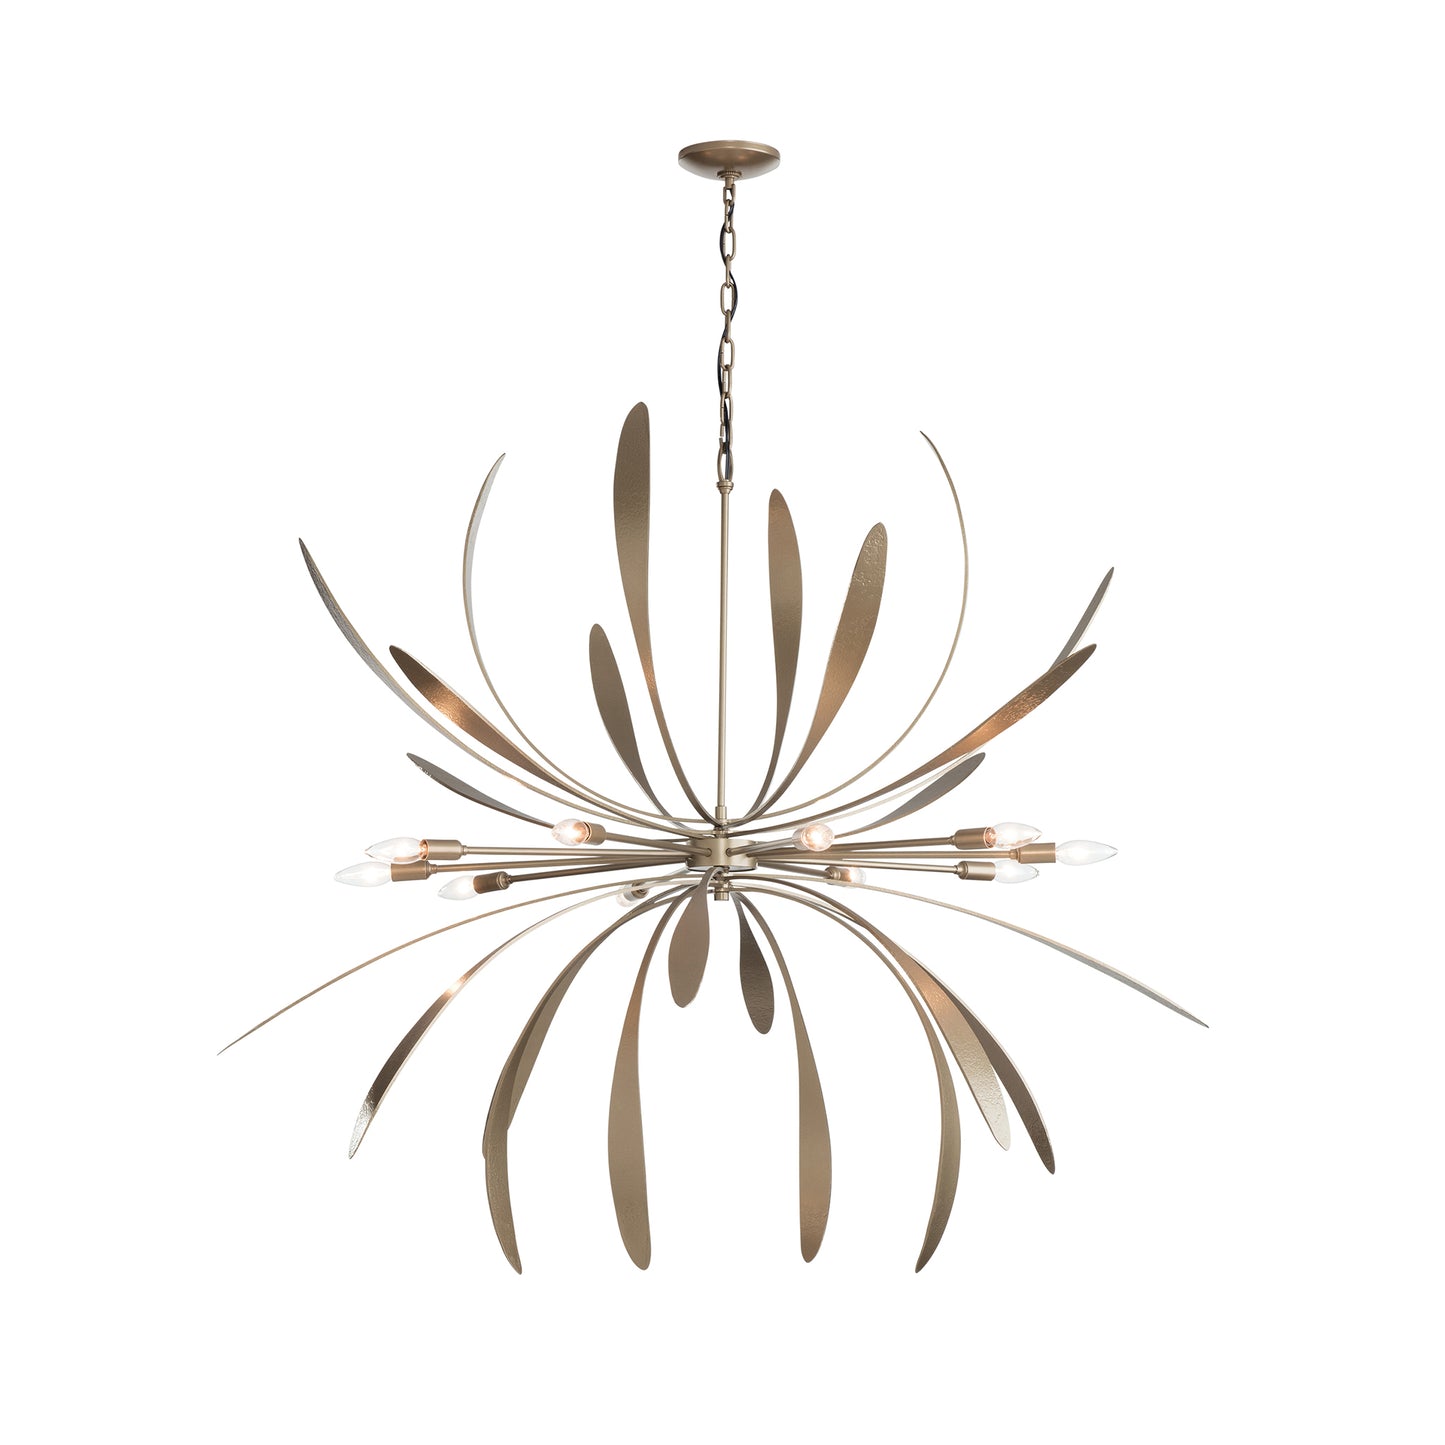 The handcrafted Large Dahlia Chandelier, created by renowned craftsmen at Hubbardton Forge, features a beautiful metal leaf design.